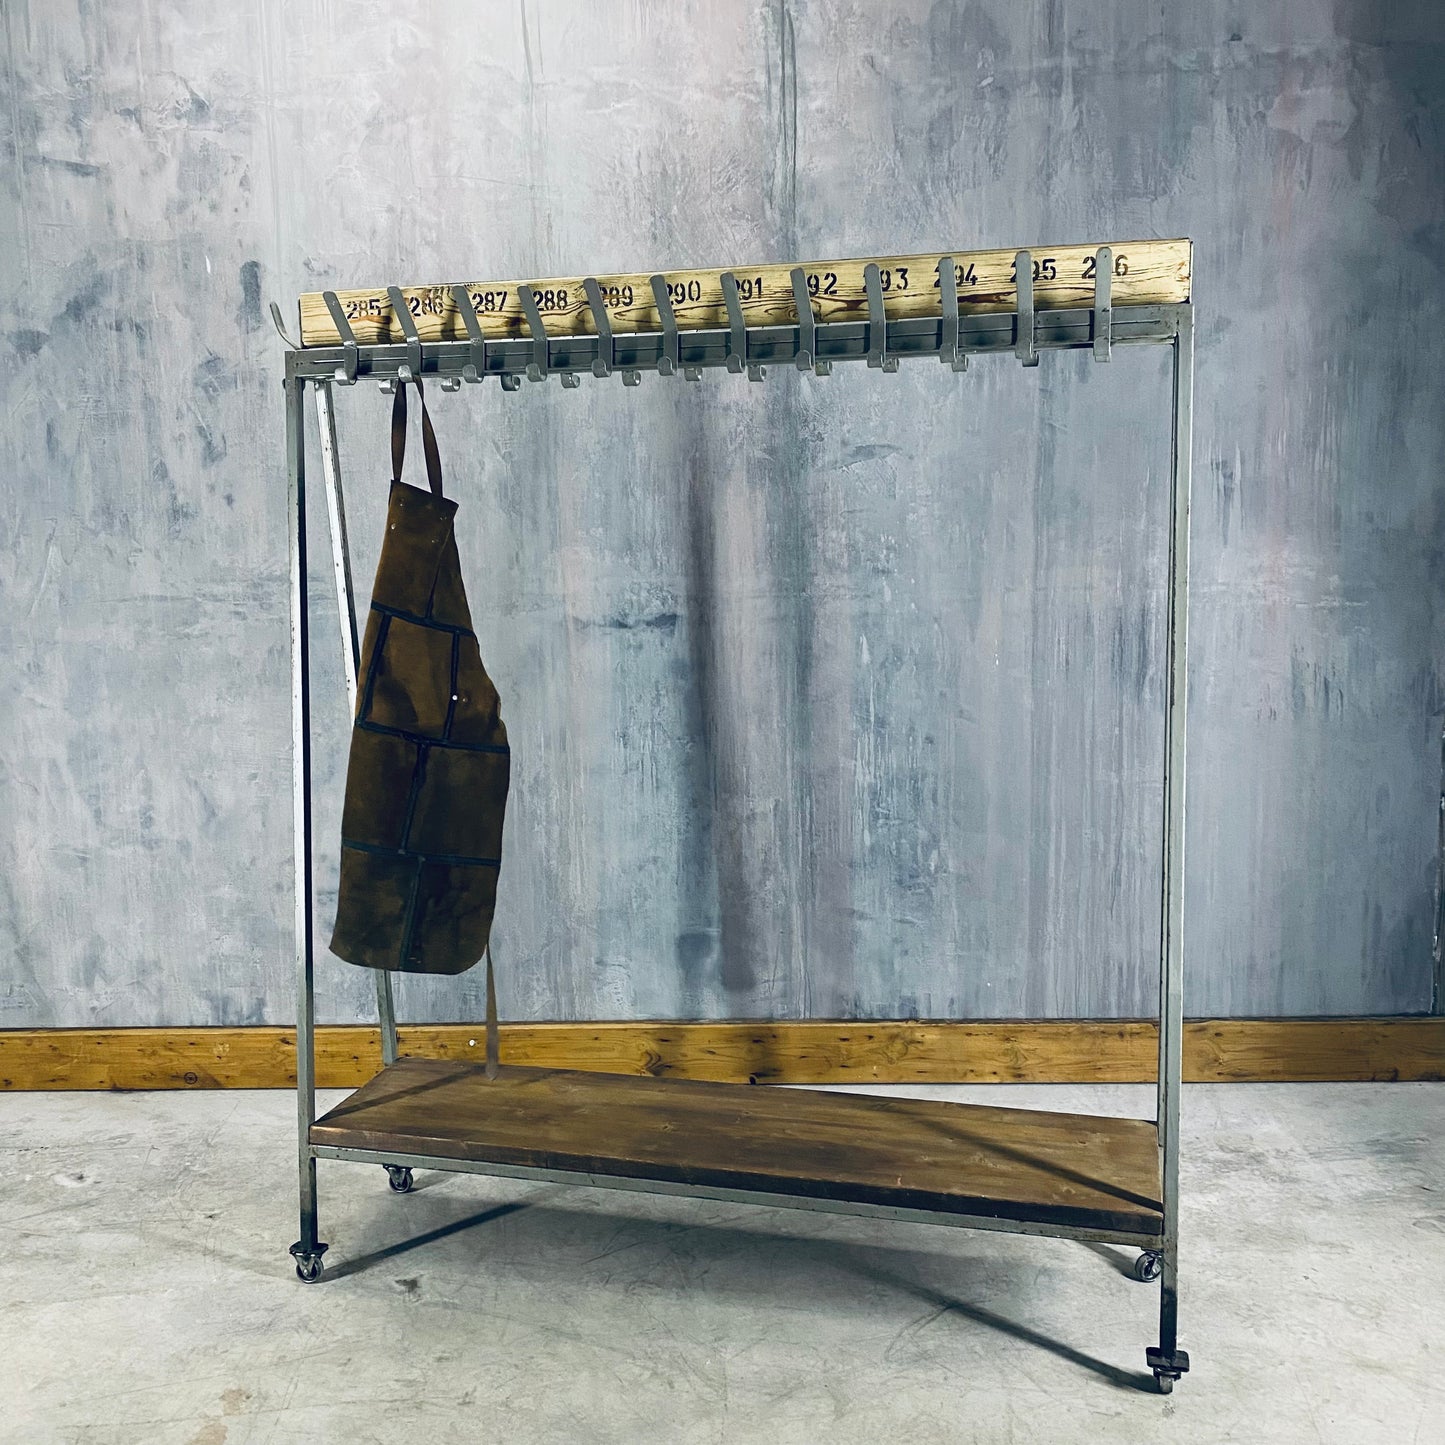 Clothes rack from old sport school.